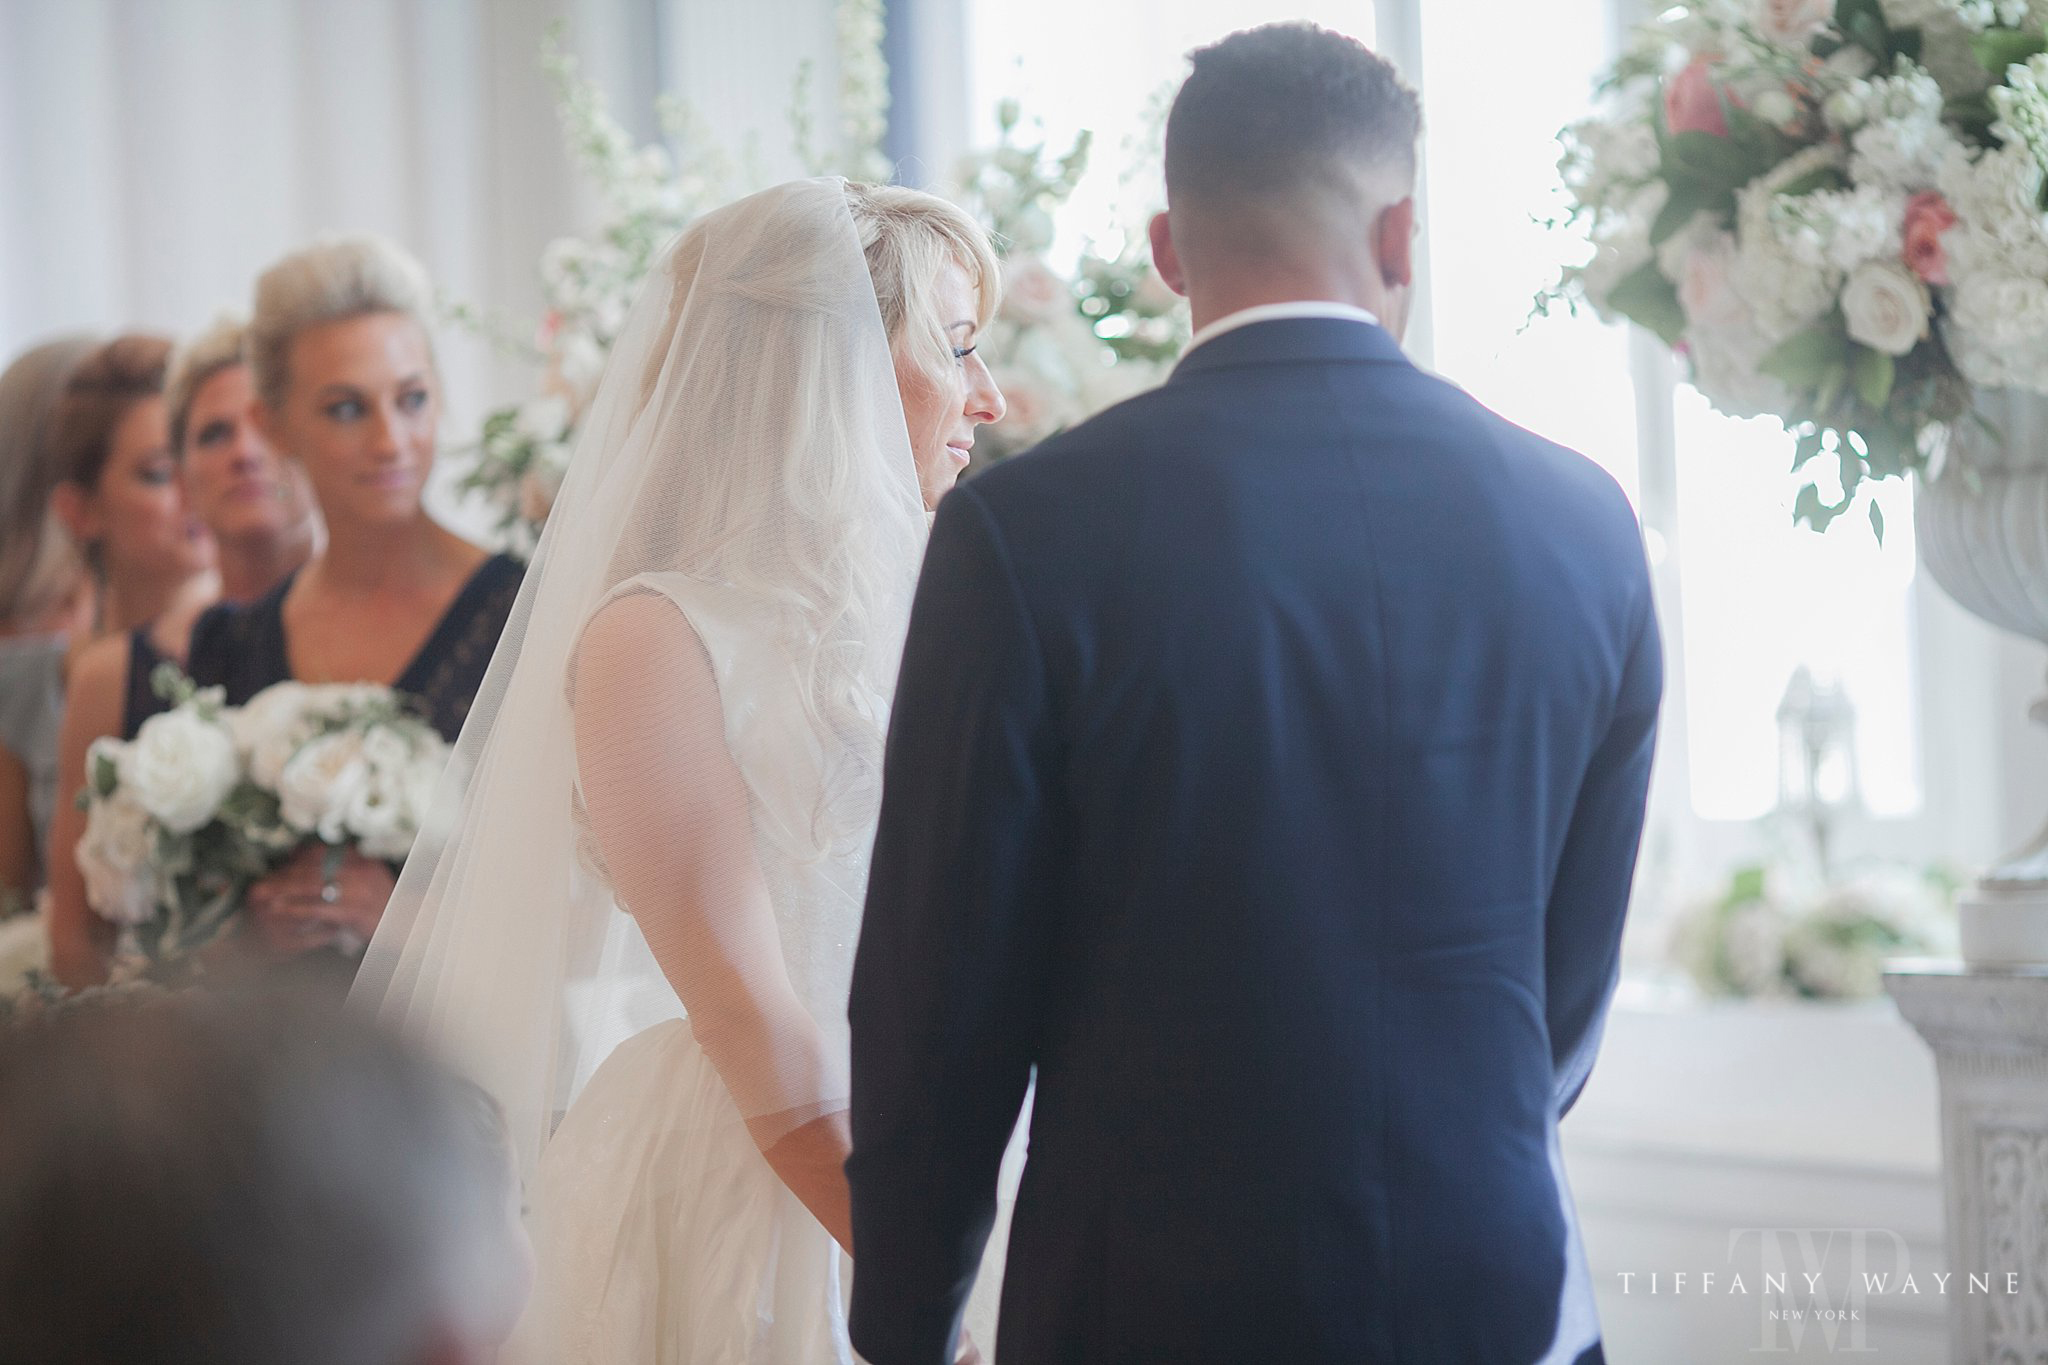 bride and groom during wedding ceremony photographed by Tiffany Wayne Photography